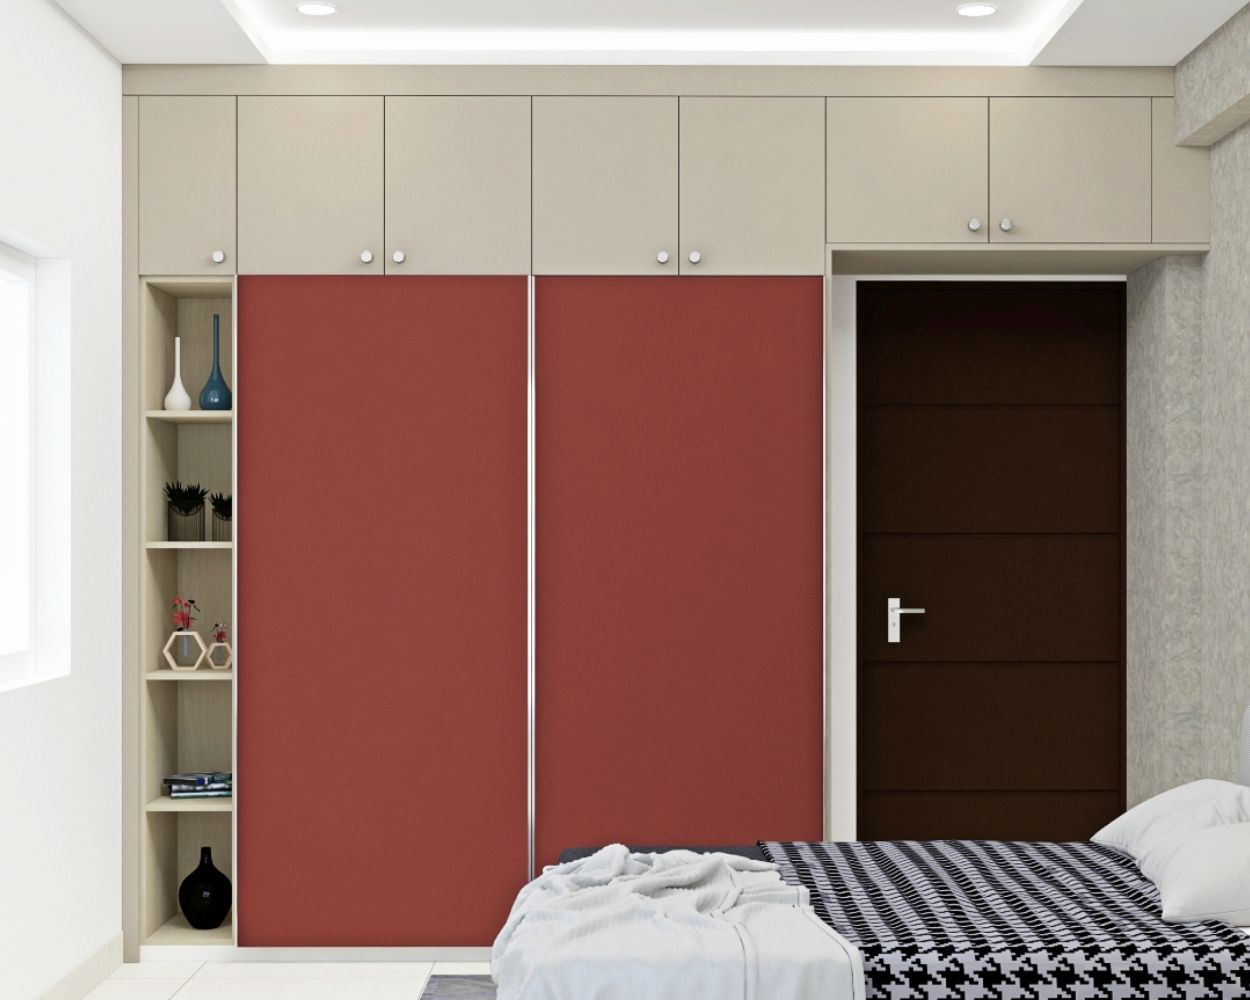 Modern 2-Door Cardinal Red And Pumic Grey Sliding Wardrobe Design With Open Shelves And Loft Storage